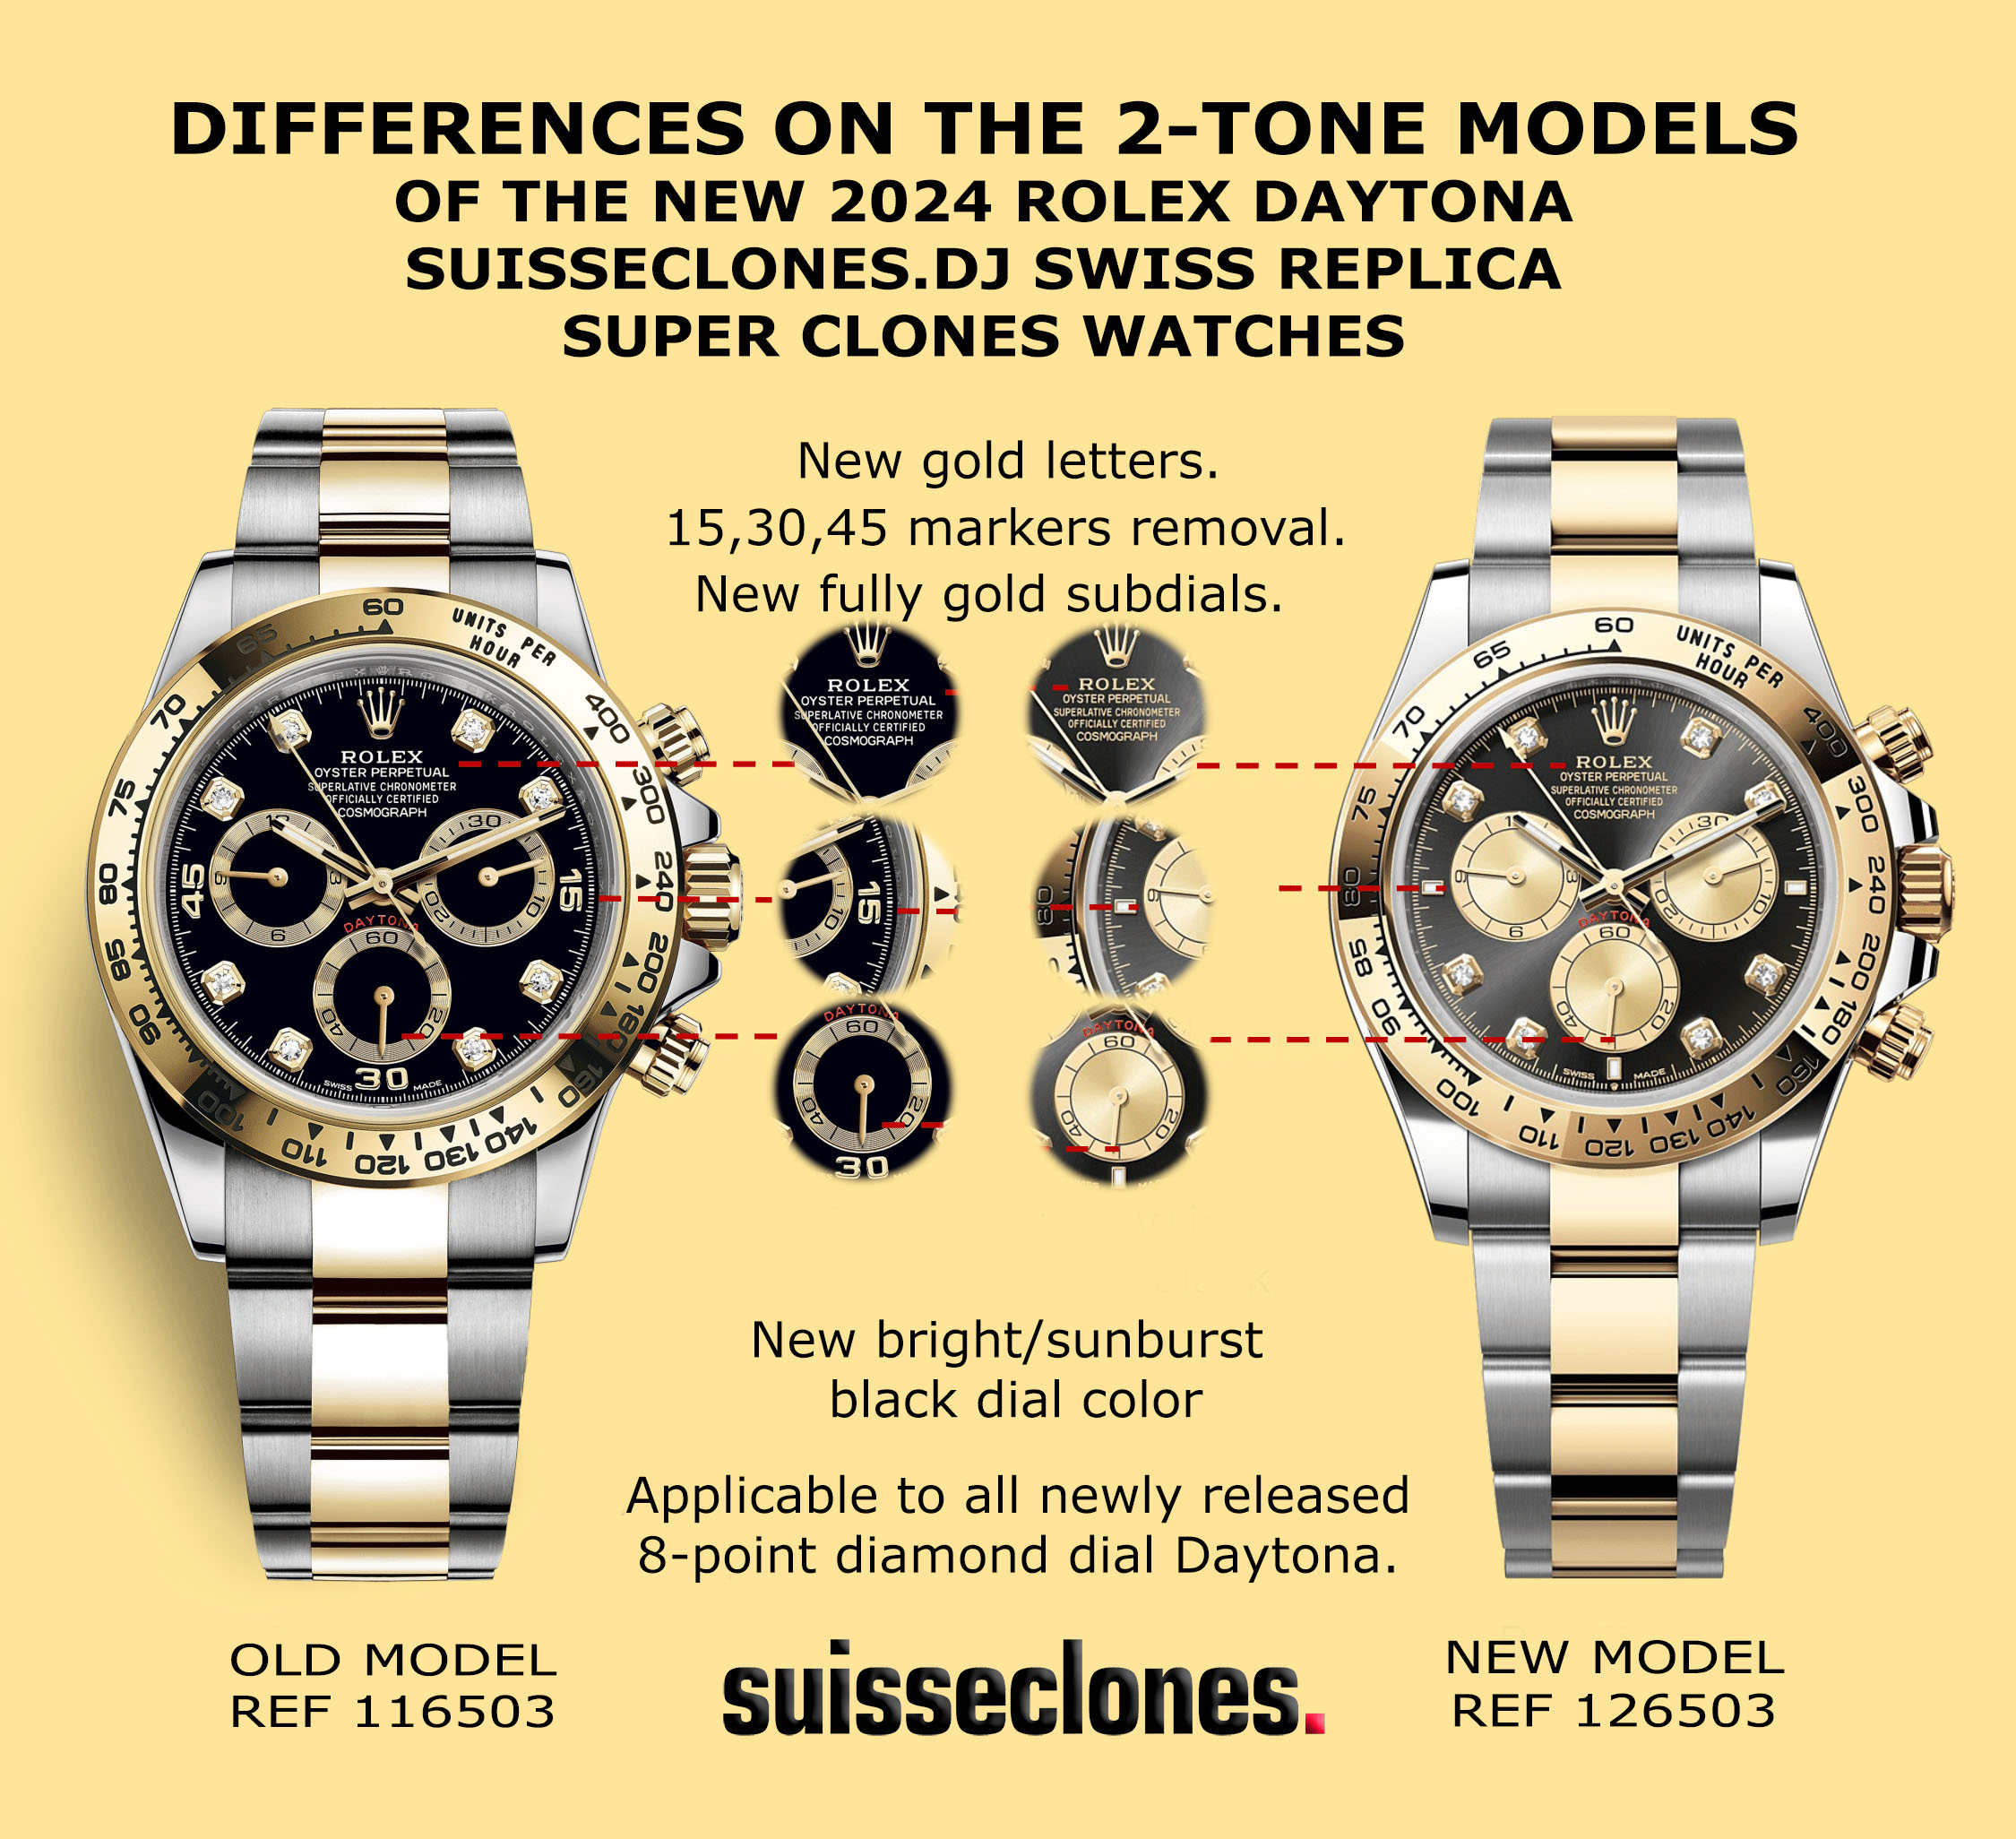 Infographics For The Upgrades Of The Suisseclones.dj 2024 Swiss Replica Daytona 2-tone Yellow Gold Super Clone Watches.